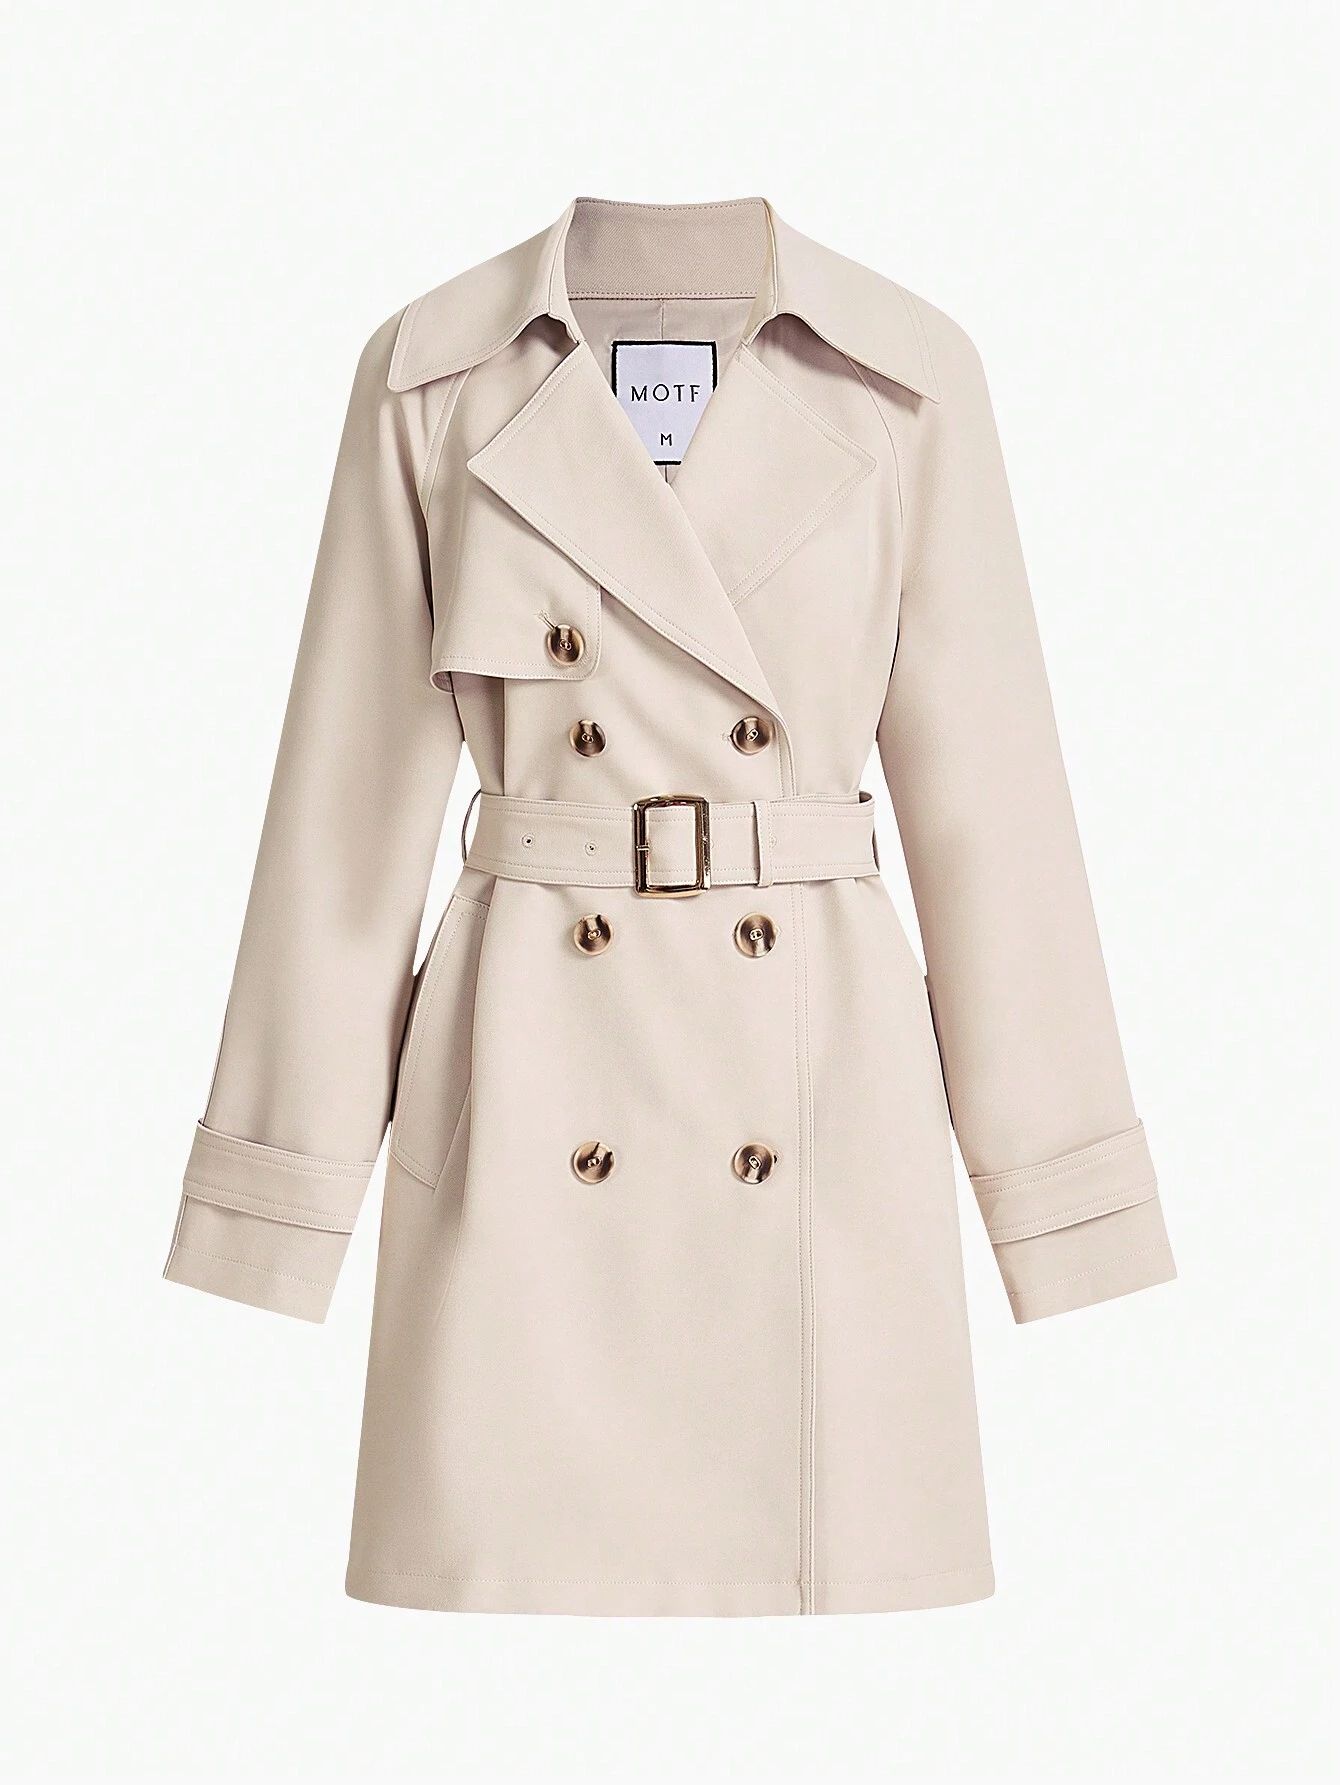 MOTF PREMIUM DOUBLE BREASTED BELTED TRENCH COAT | SHEIN